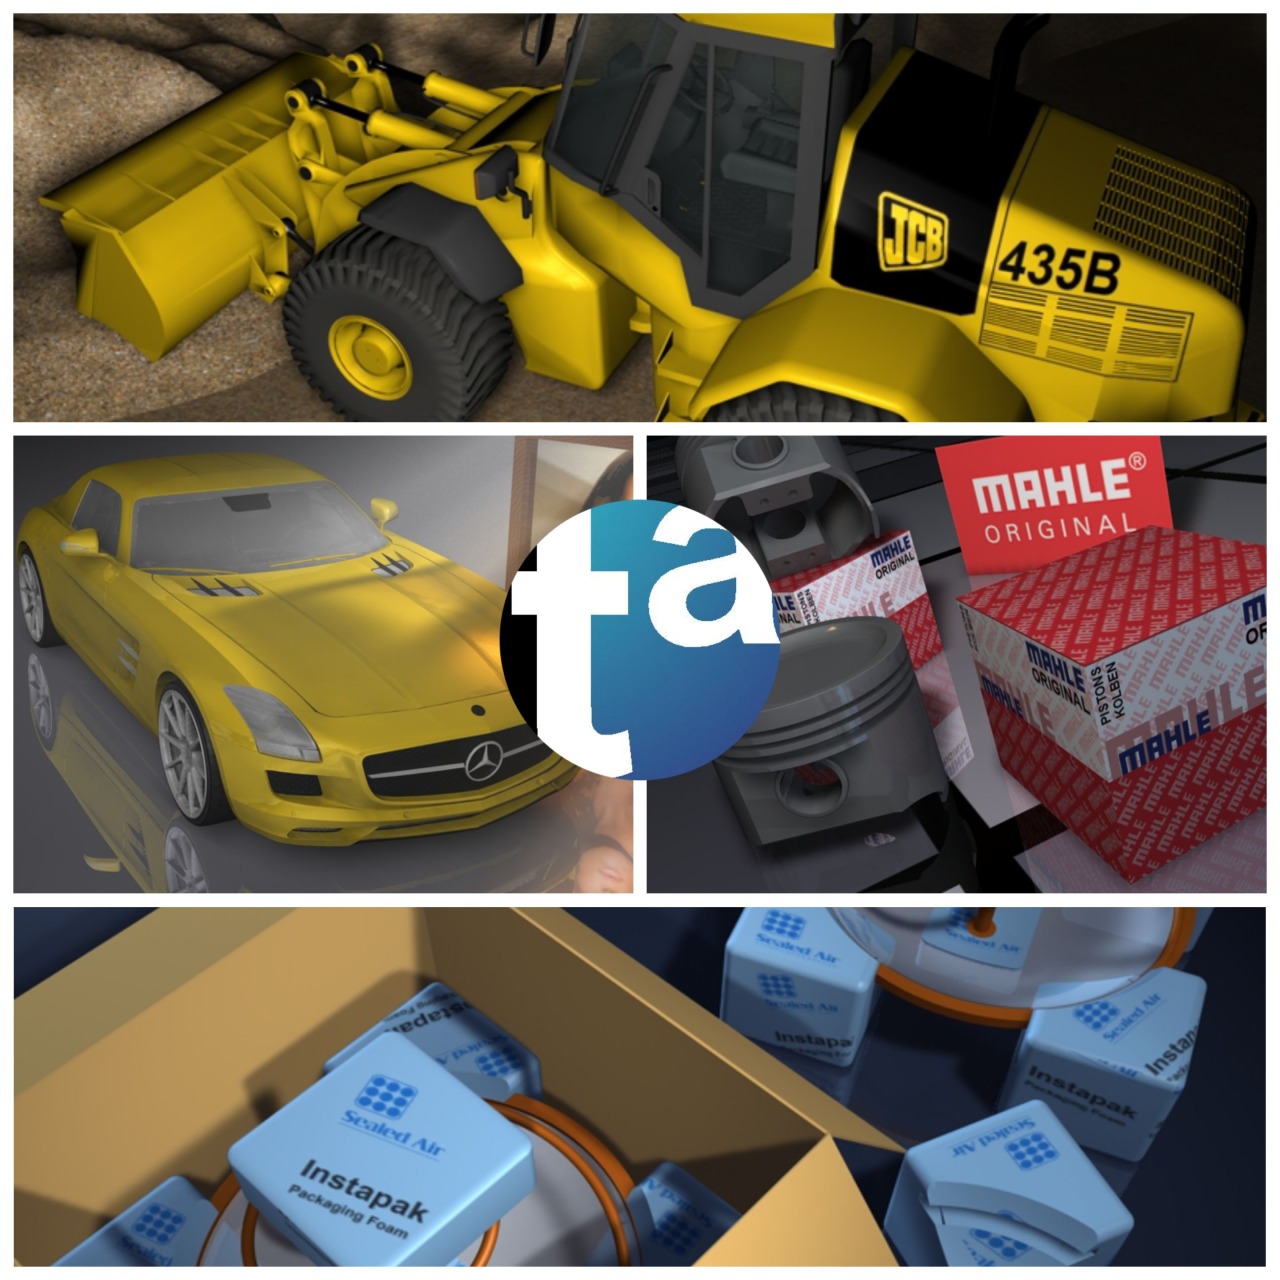 📰 I just updated our Facebook, Instagram and LinkedIn pages / May 21, 2022

▸ Posted on Facebook

▸ Posted on Instagram

▸ Posted on LinkedInSources: Facebook / Instagram / LinkedIn - May 21, 2022 #TAEVision#engineering#3d#mechanicaldesign#facebook#instagram#LinkedIn